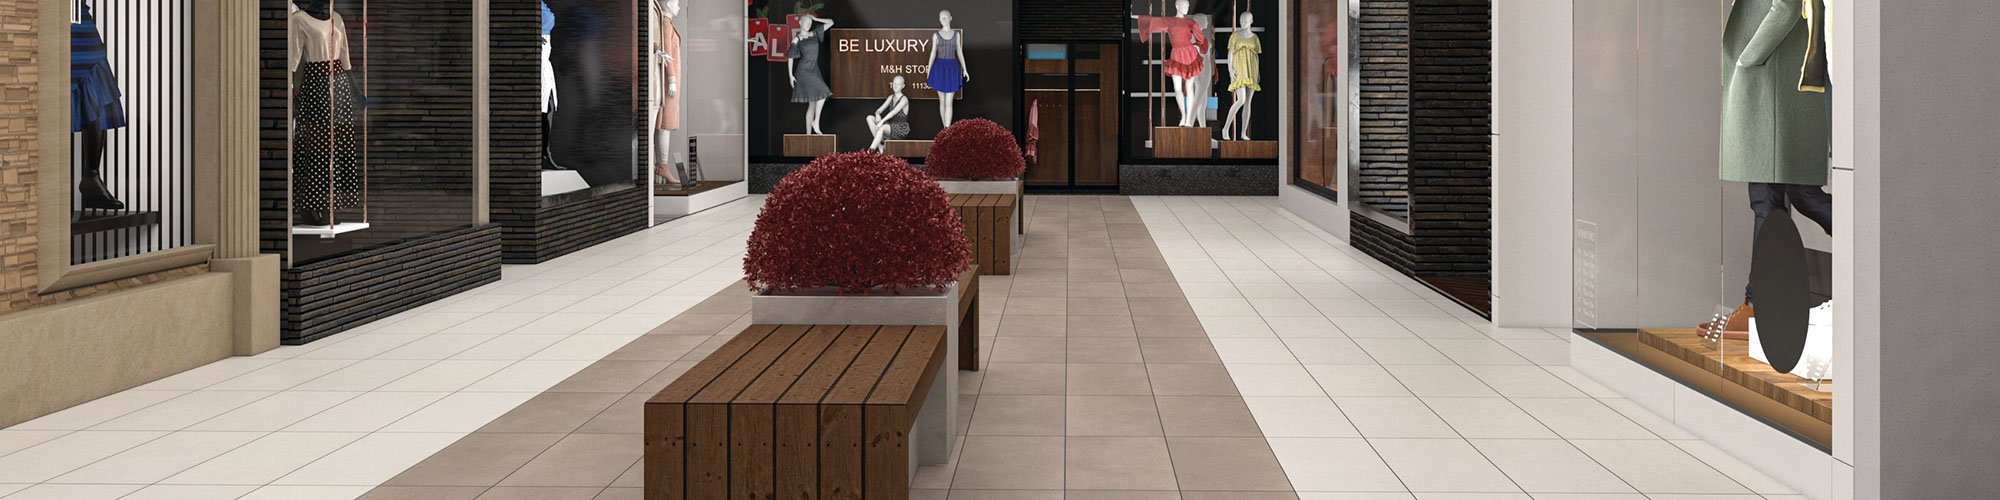 Shopping mall with brown and beige floor tile that looks like concrete, wood benches around concrete planters, and store windows with mannequins in women’s clothing.